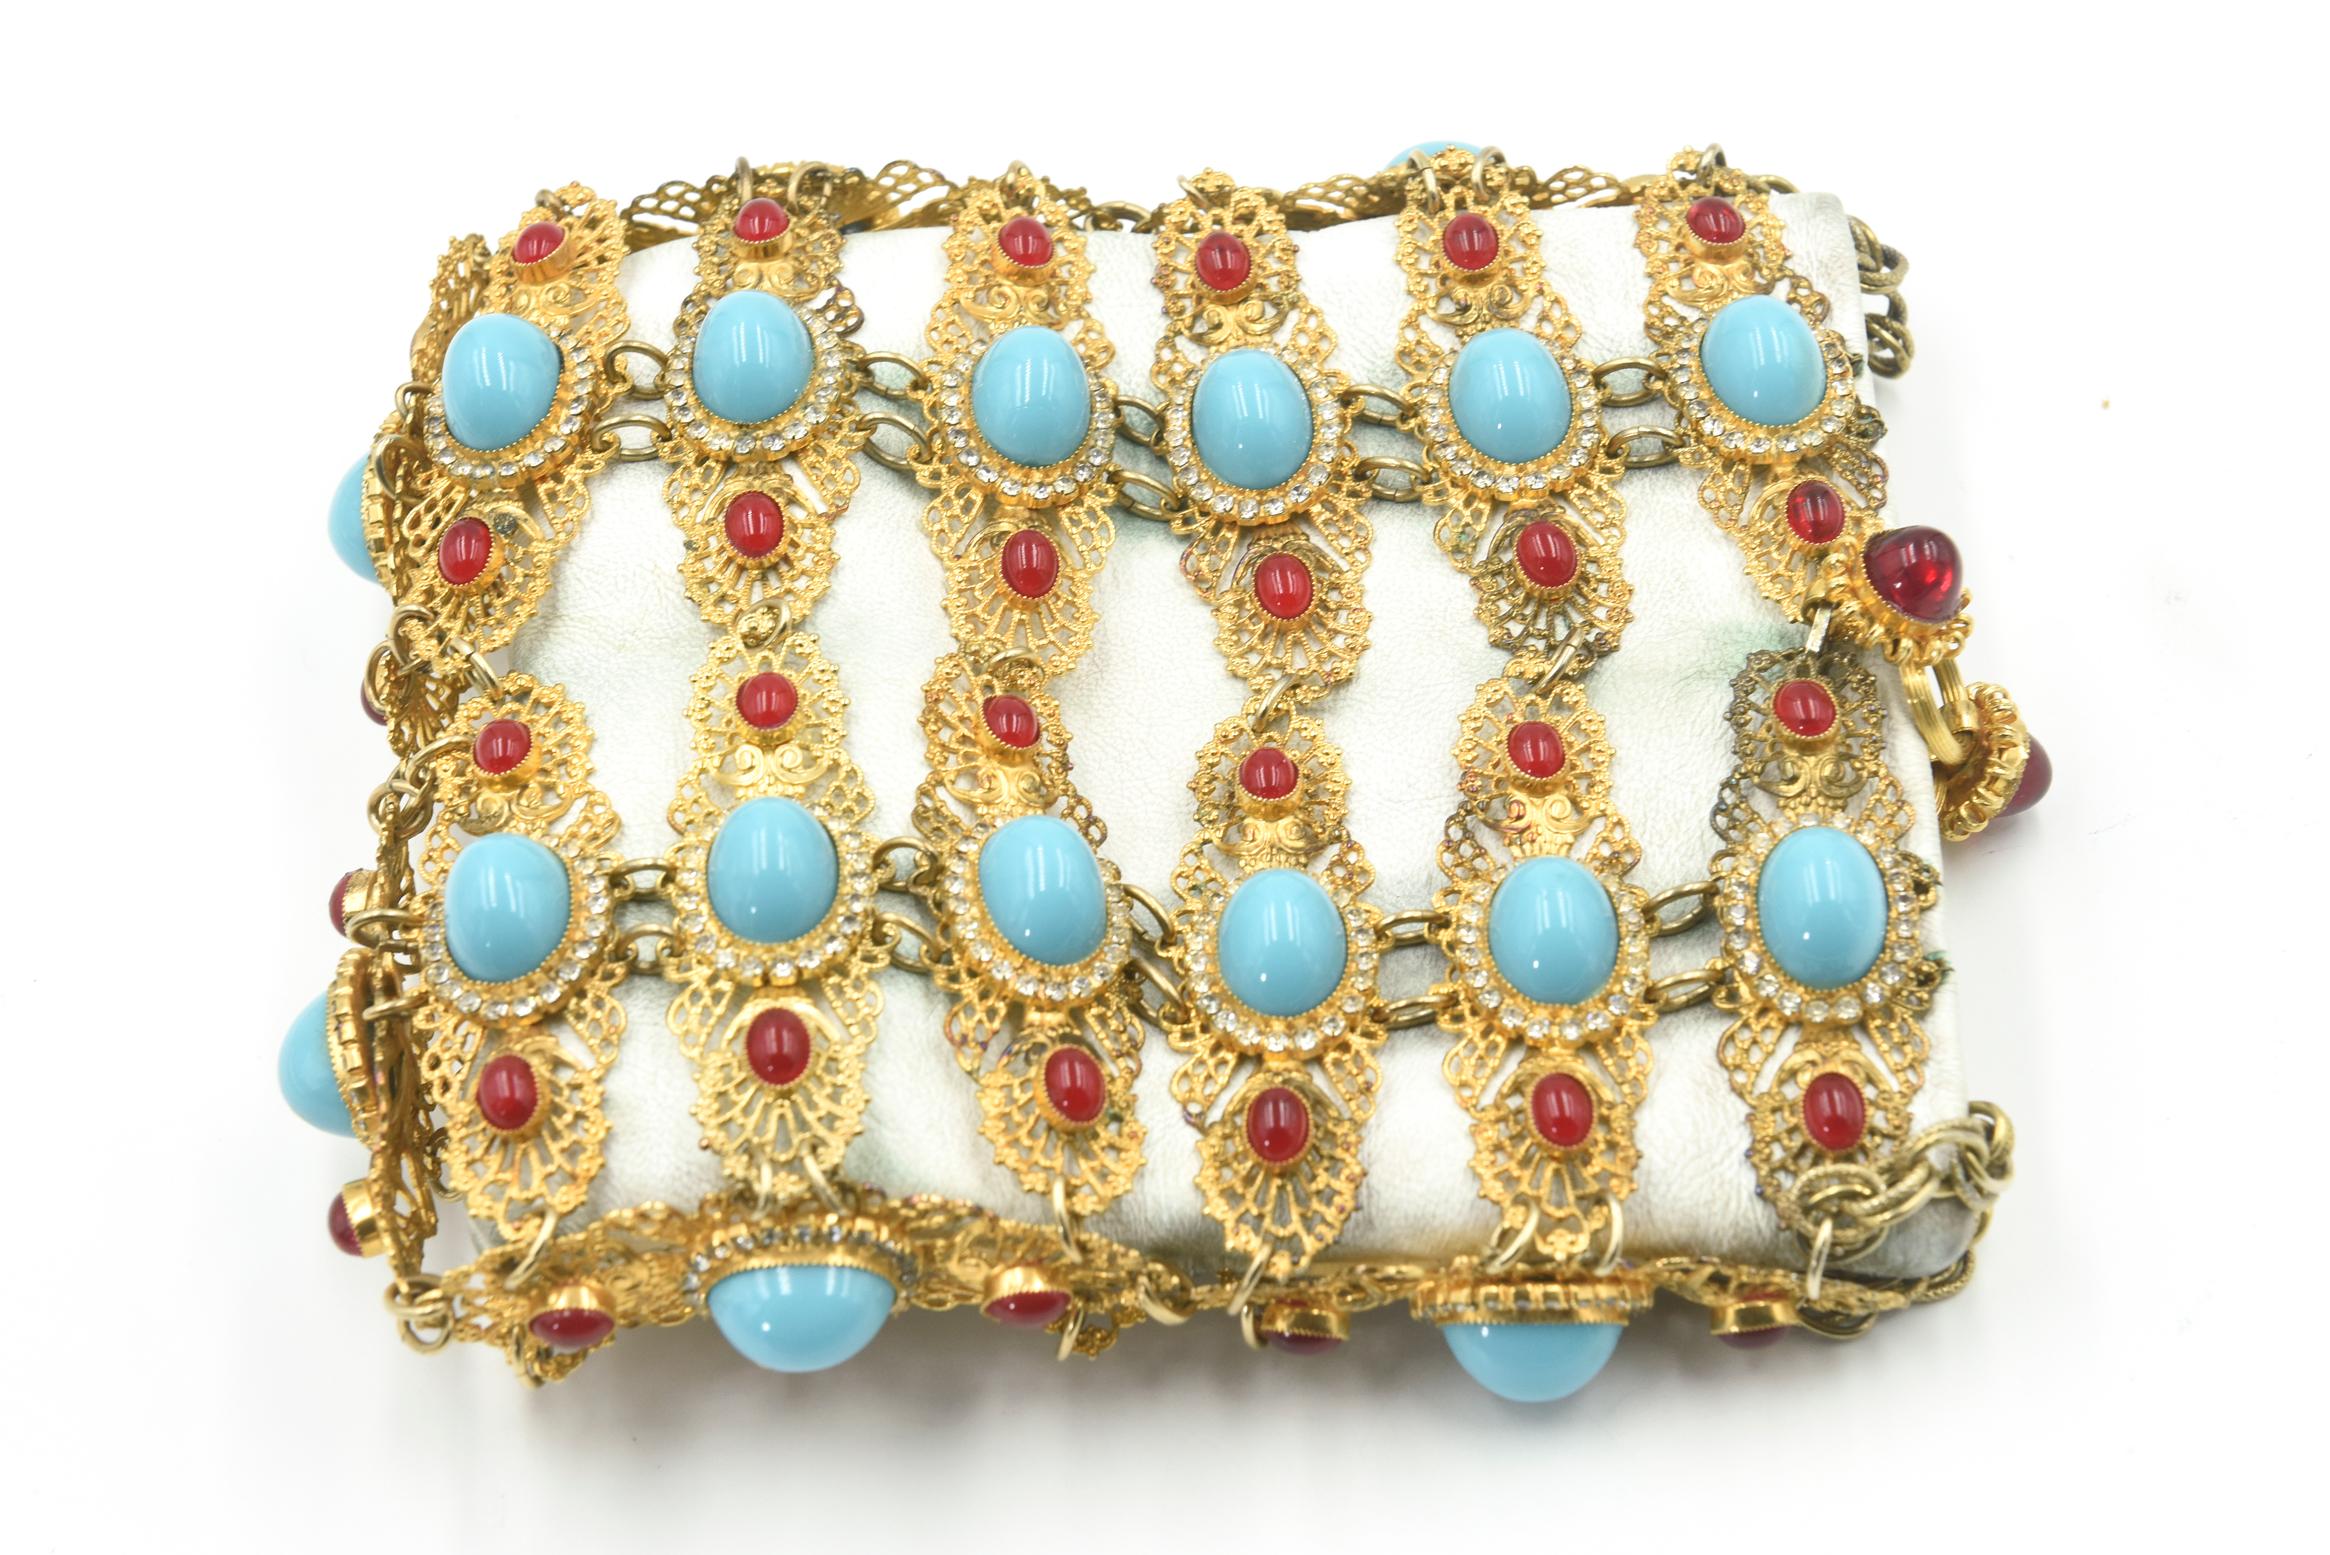 A unique (one of a kind) evening bag by William de Lillo.  The off white leather handbag is set within an ornate gilt metal and stone exterior bag.  It is comprised of a large oval faux turquoise (robin's egg blue) glass set in a rhinestone frame. 